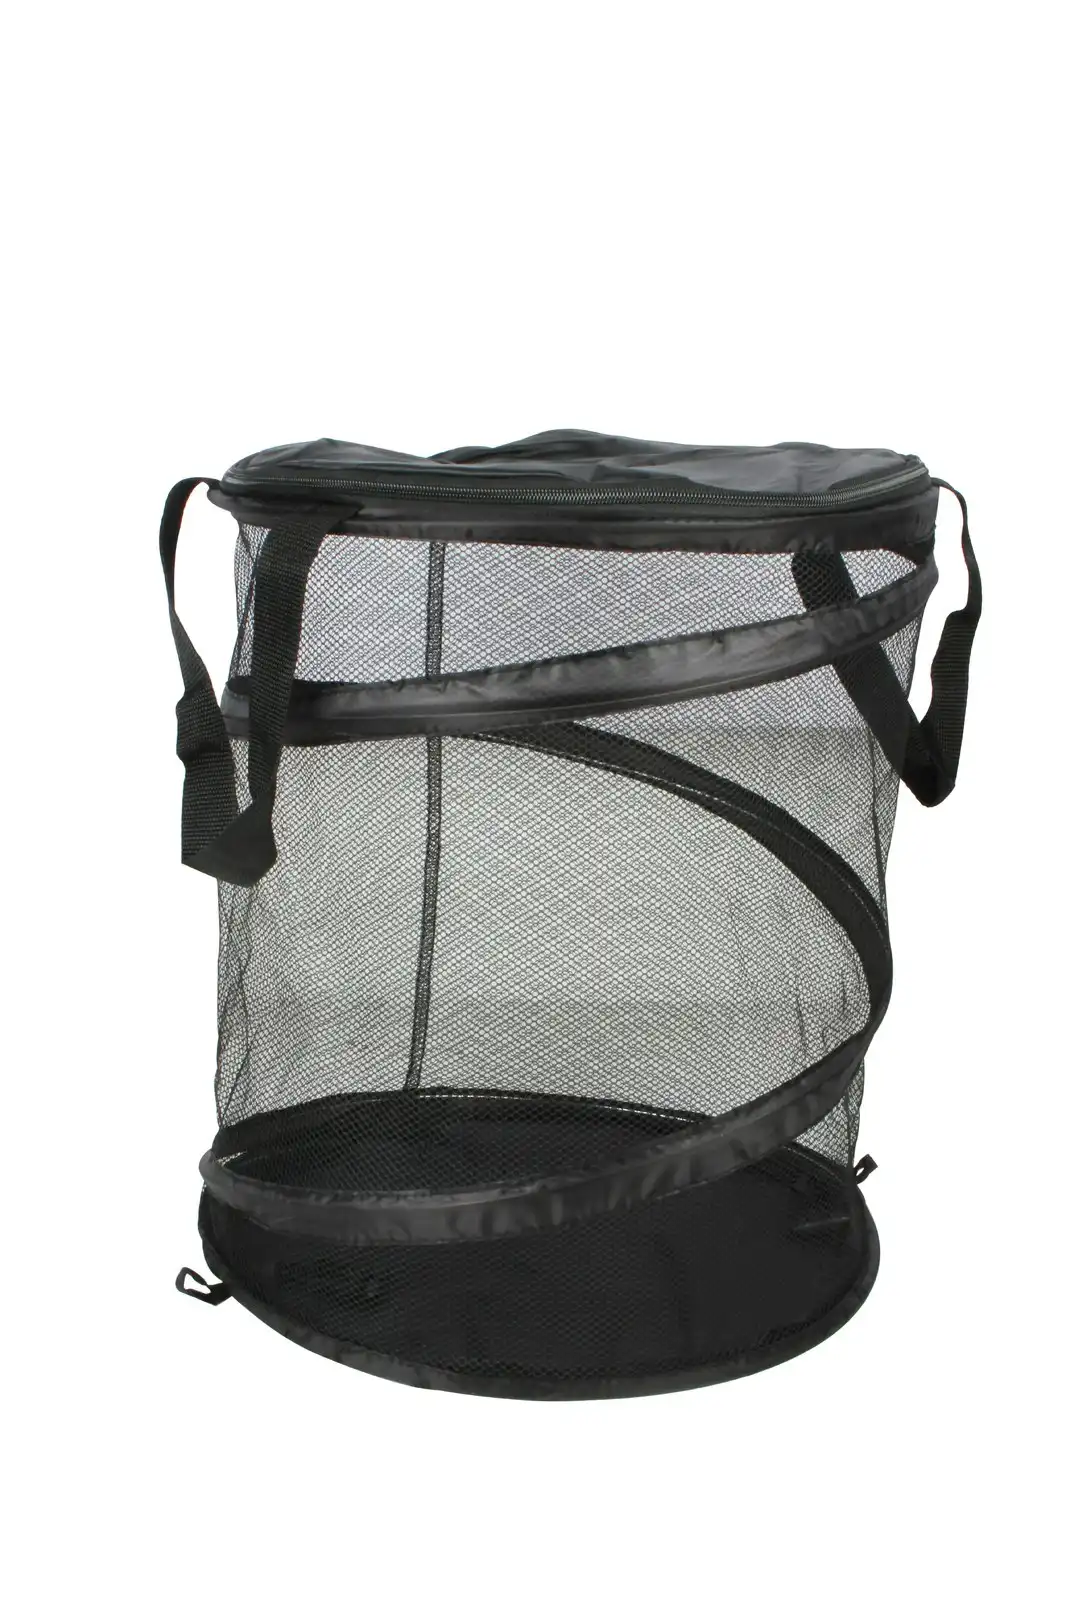 Cockatoo Camping Collapsible 45x30cm Storage Container Bin w/Carry Handles Black